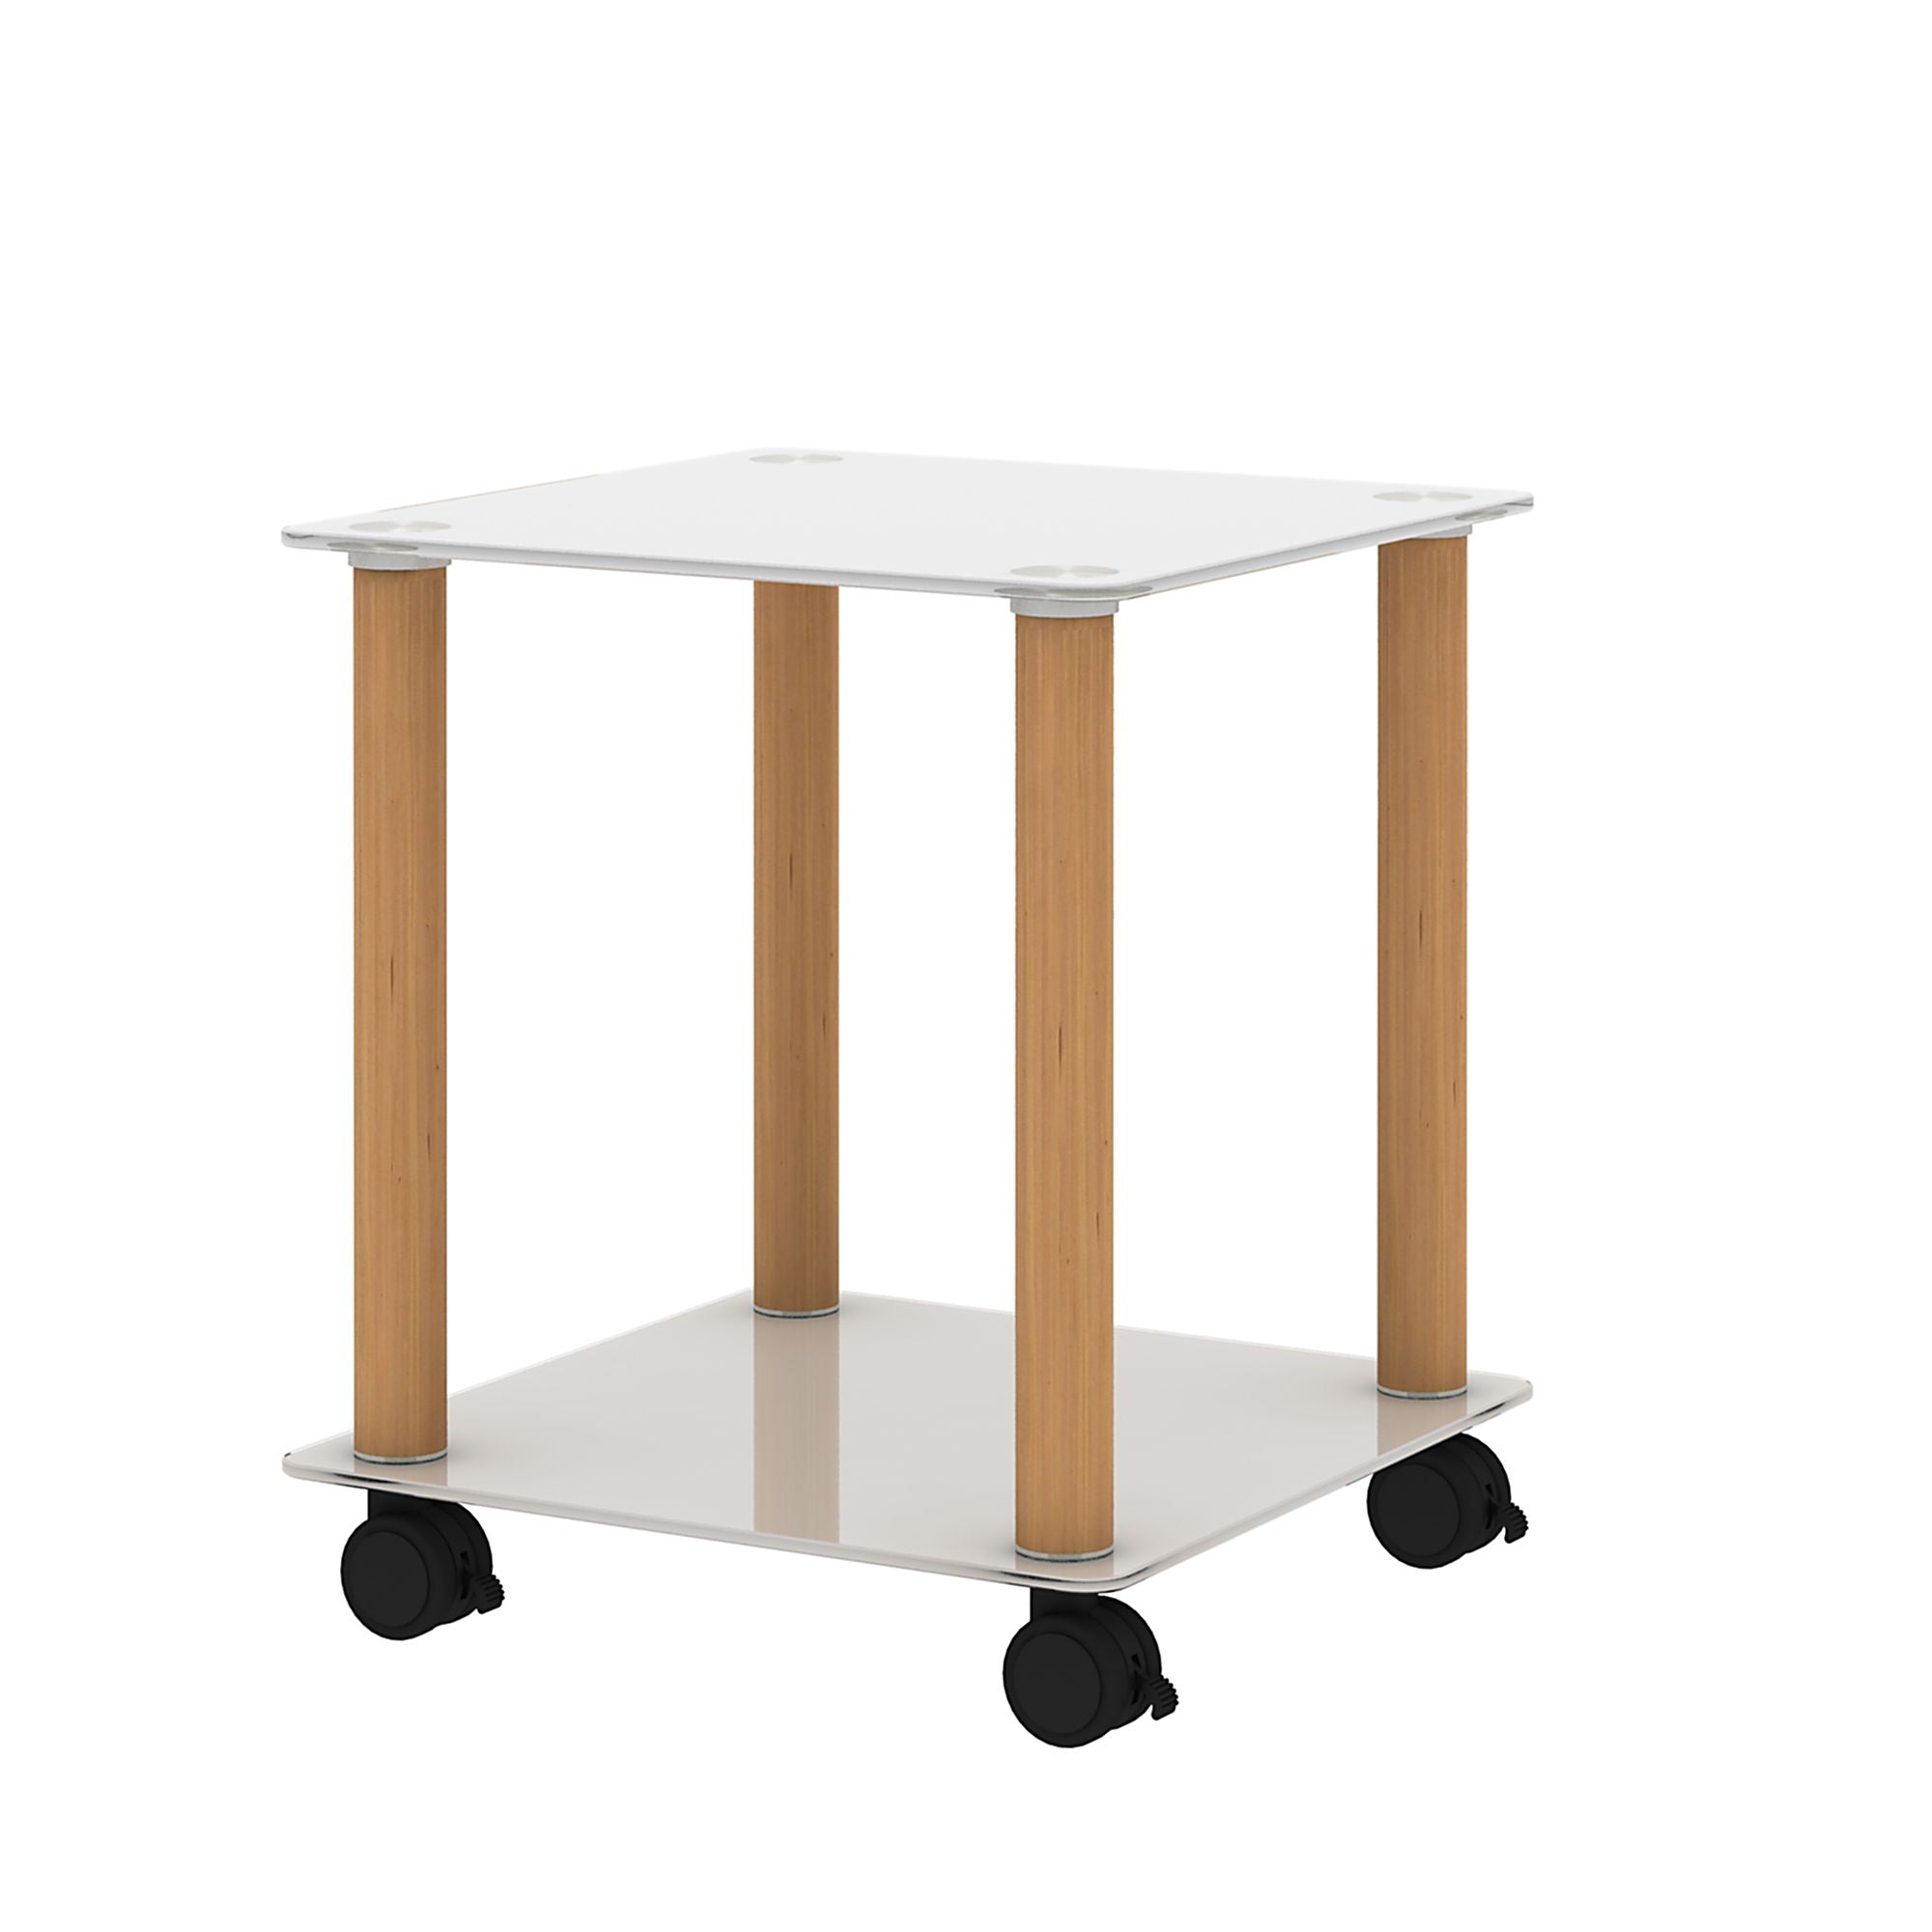 1 Piece White And Oak Side Table, 2-Tier Space End Table, Modern Night Stand, Sofa Table, Side Table With Storage Shelve